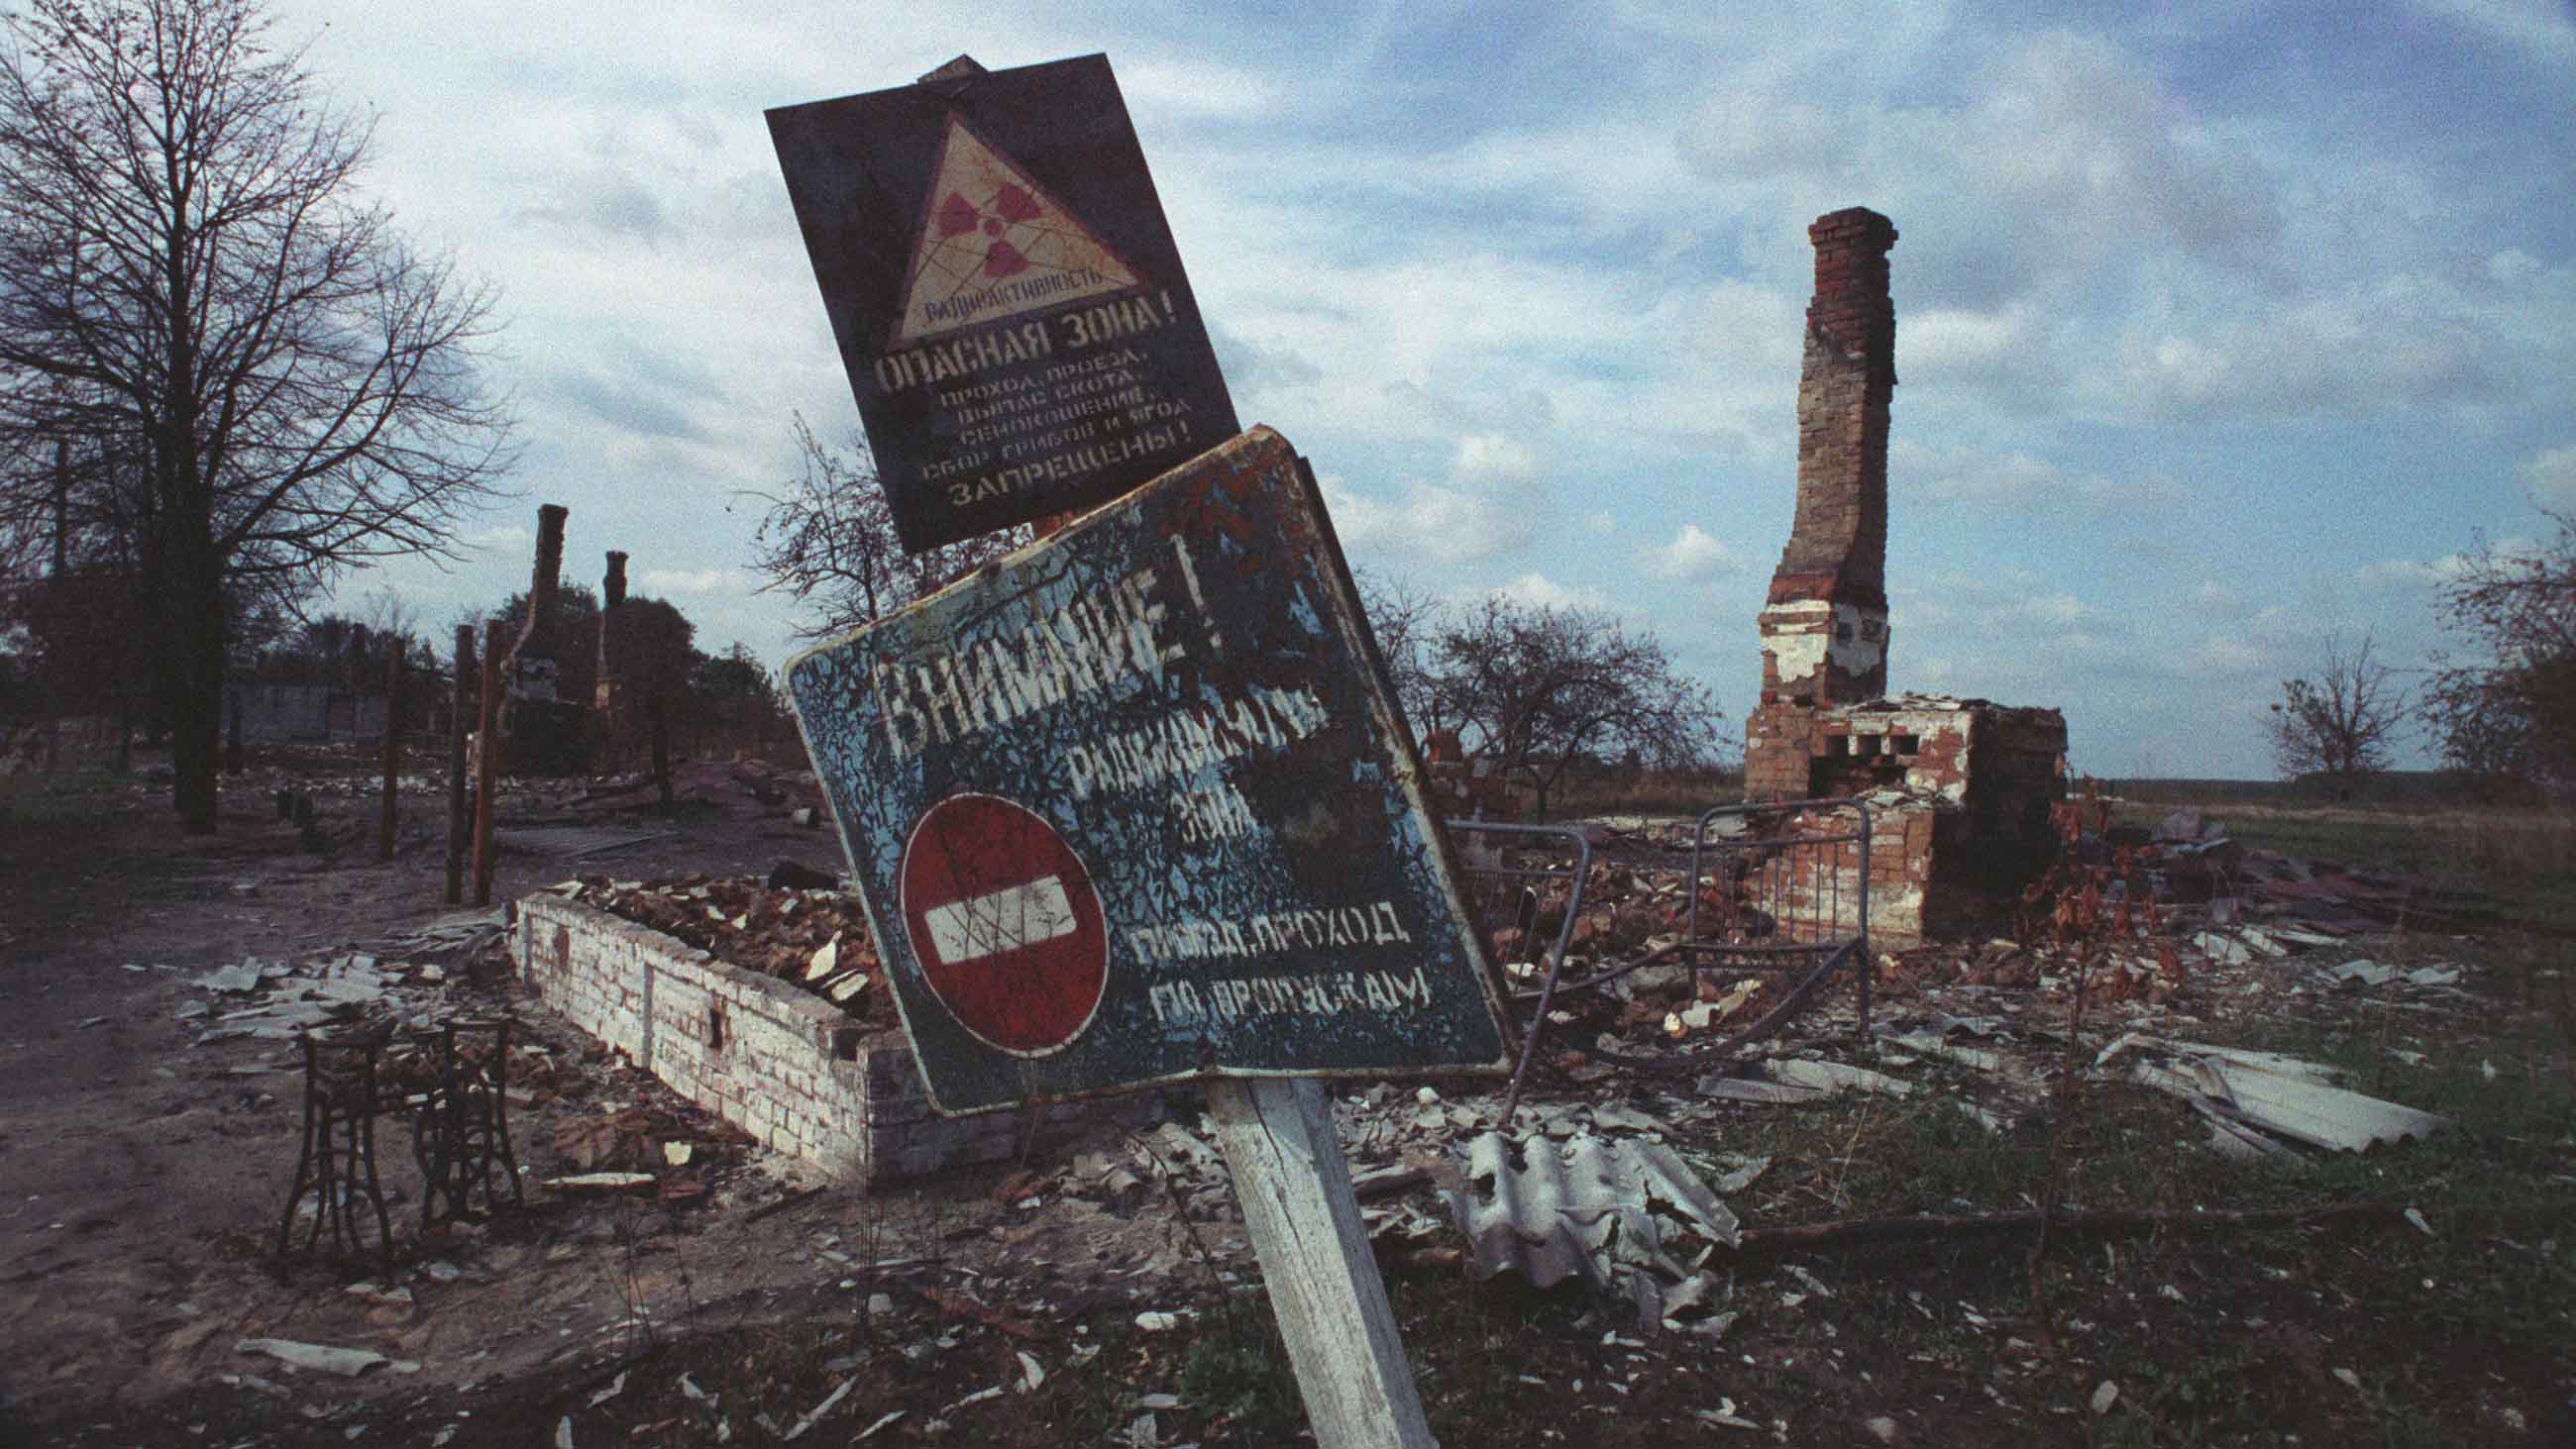 Part of the village of Sviatsk in the Bryansk region lies in ruins after it was destroyed by liquidators. All that remains to destroy are the old Russian stoves and their chimneys. The sign reads "Attention, radioactive zone. Authorized passage only" and "Dangerous Zone! Walking, Grass, Mushroom and Bay Picking is Strictly Forbidden." (Photo by Igor Kostin/Sygma via Getty Images)